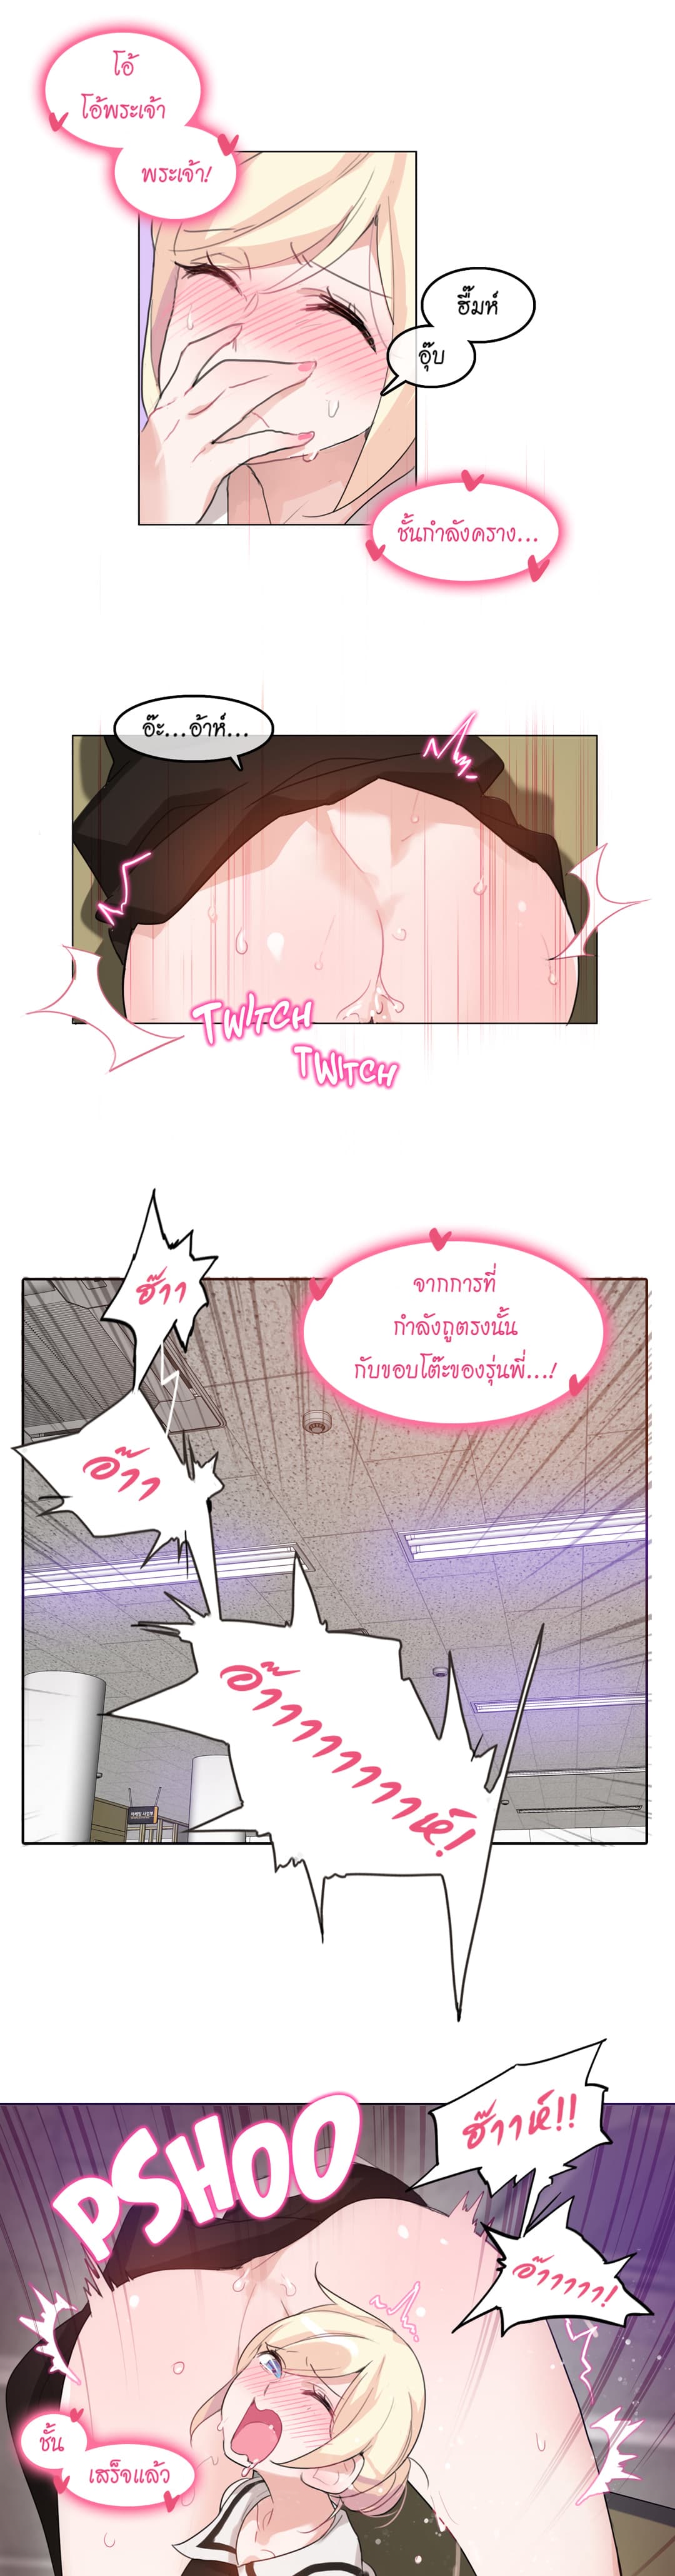 A Pervert’s Daily Life 14 (7)